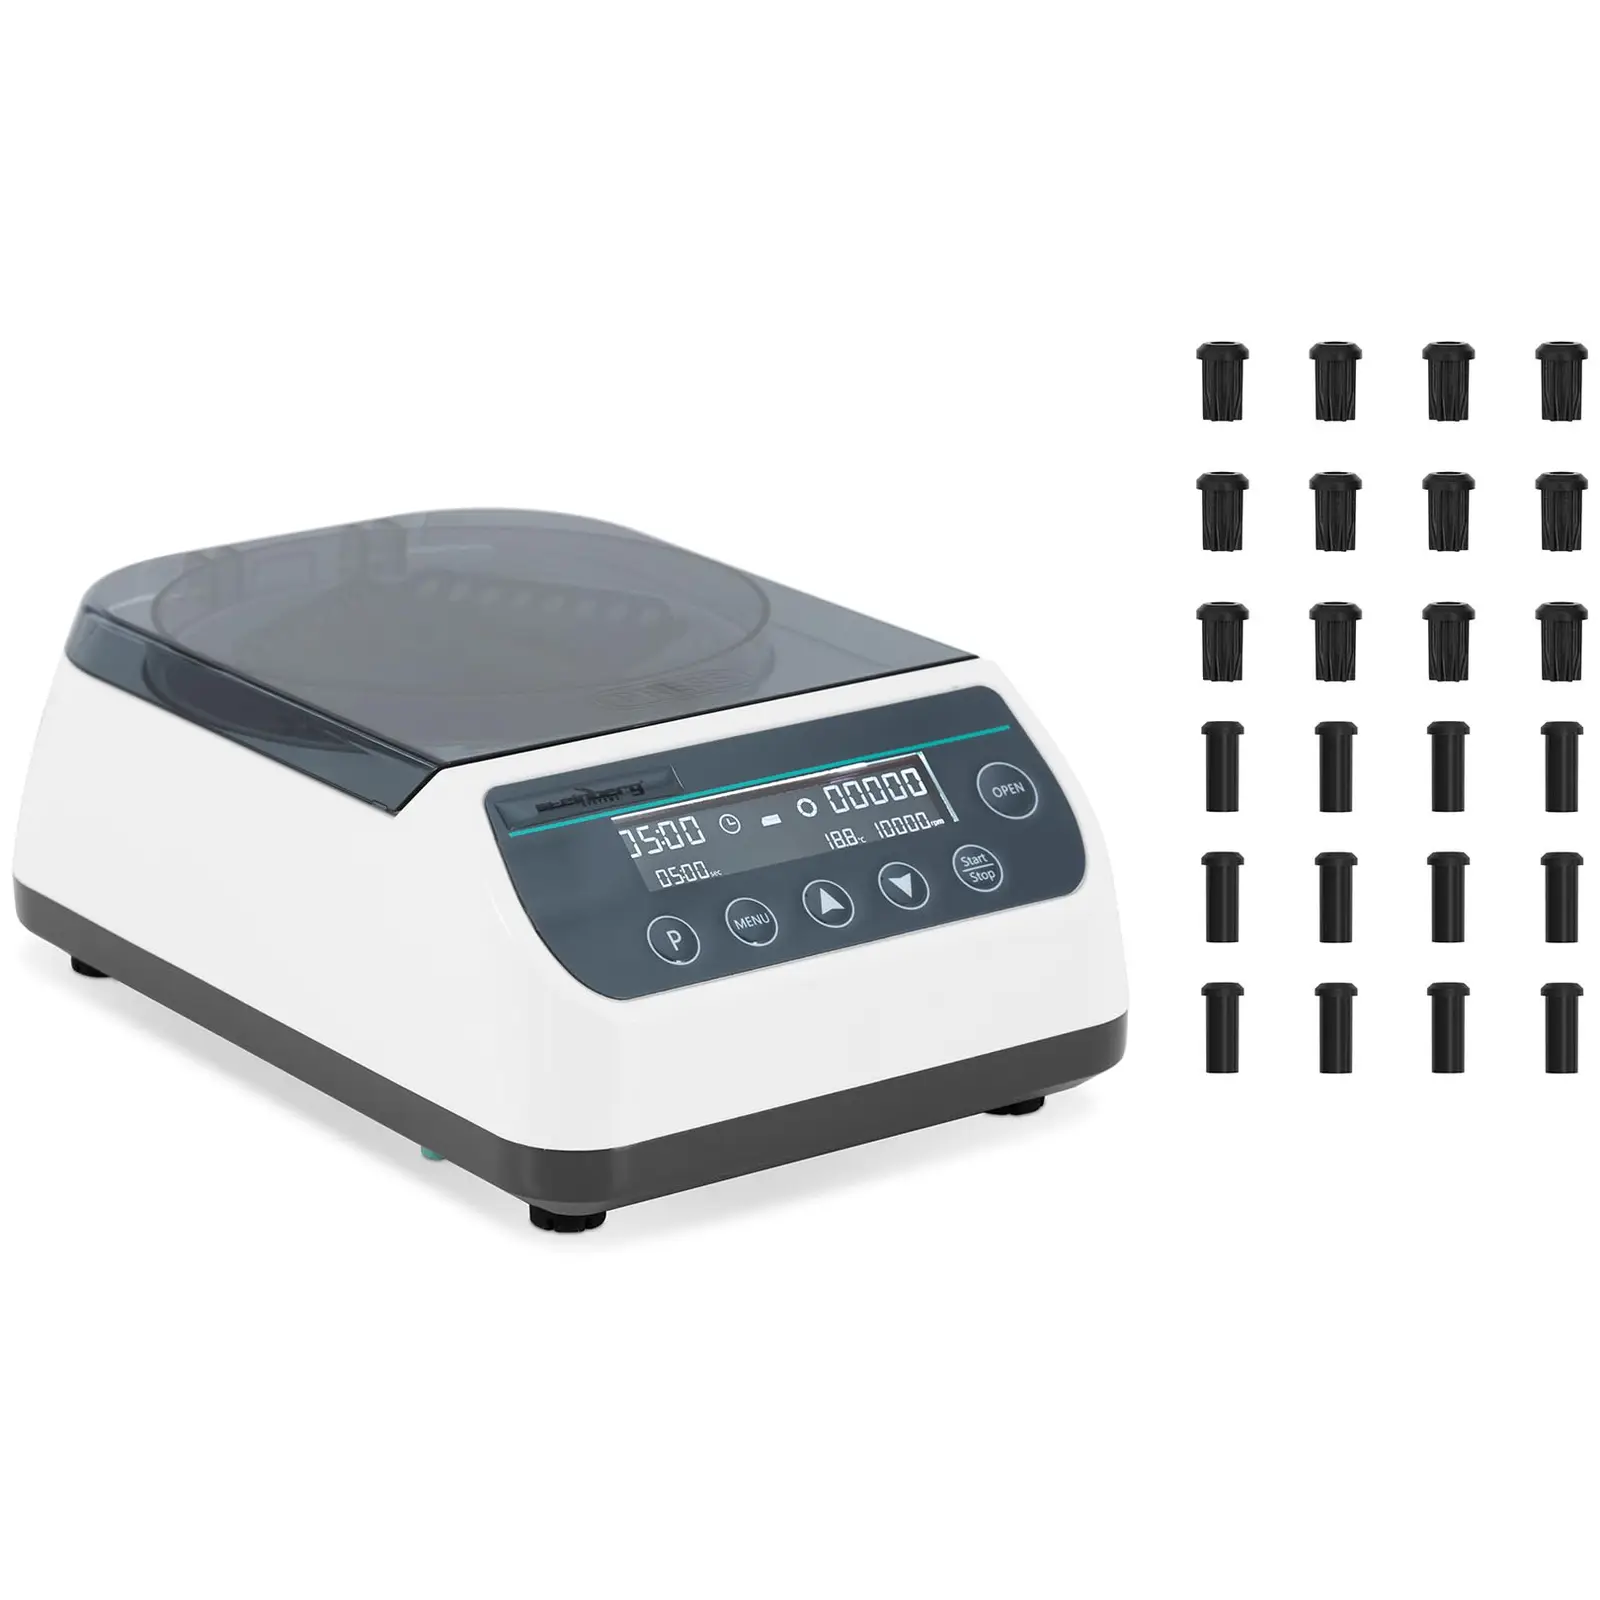 Benchtop centrifuge - High Speed - 2-in-1 rotor - 10000 rpm - for 12 tubes / 4 PCR strips - RZB 6708 xg